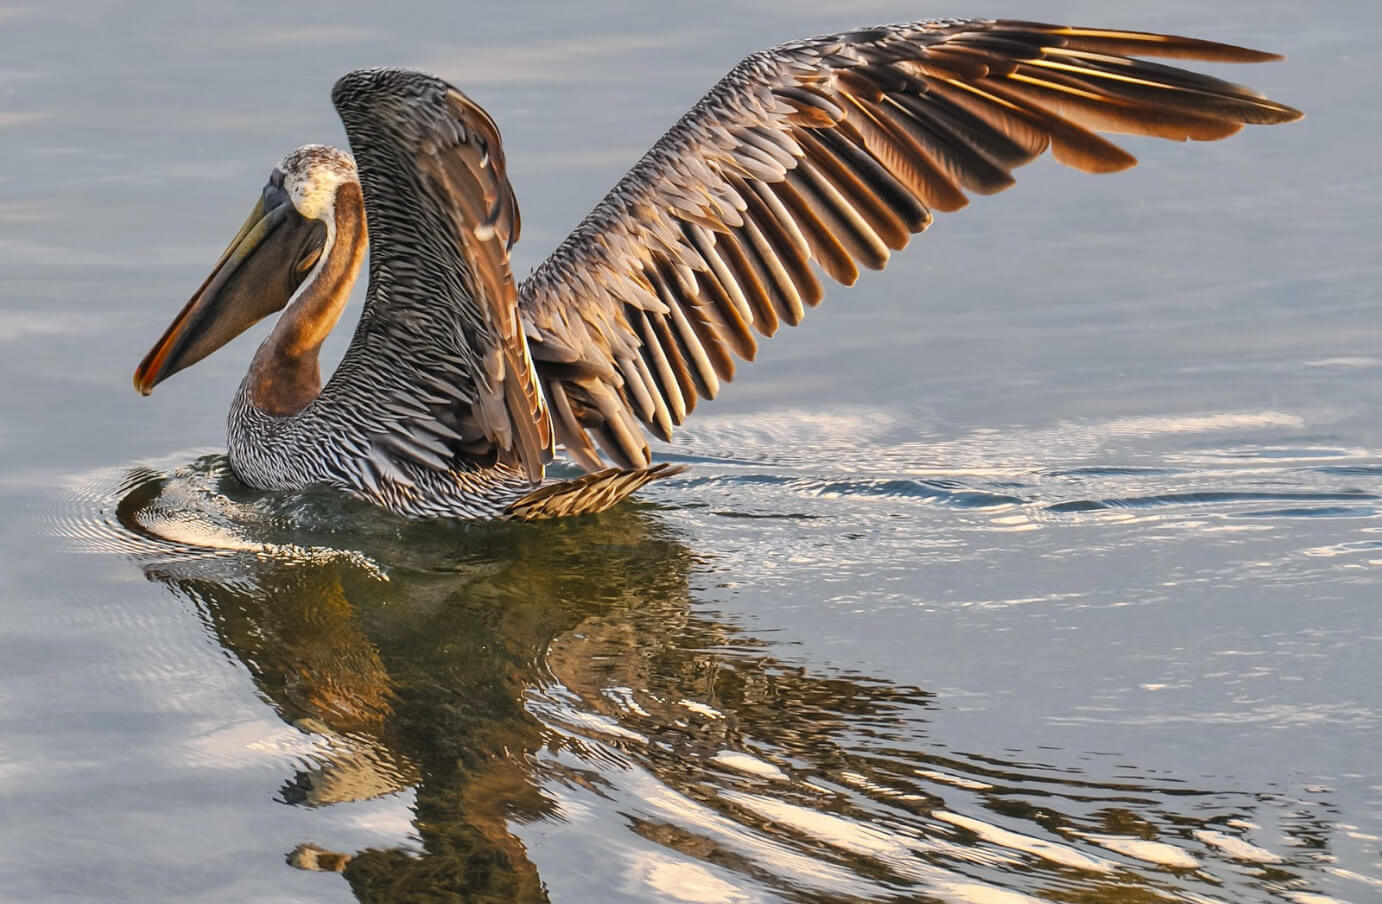 A Brown Pelican sitting in the water, with its wings extended preparing to takeoff for flight